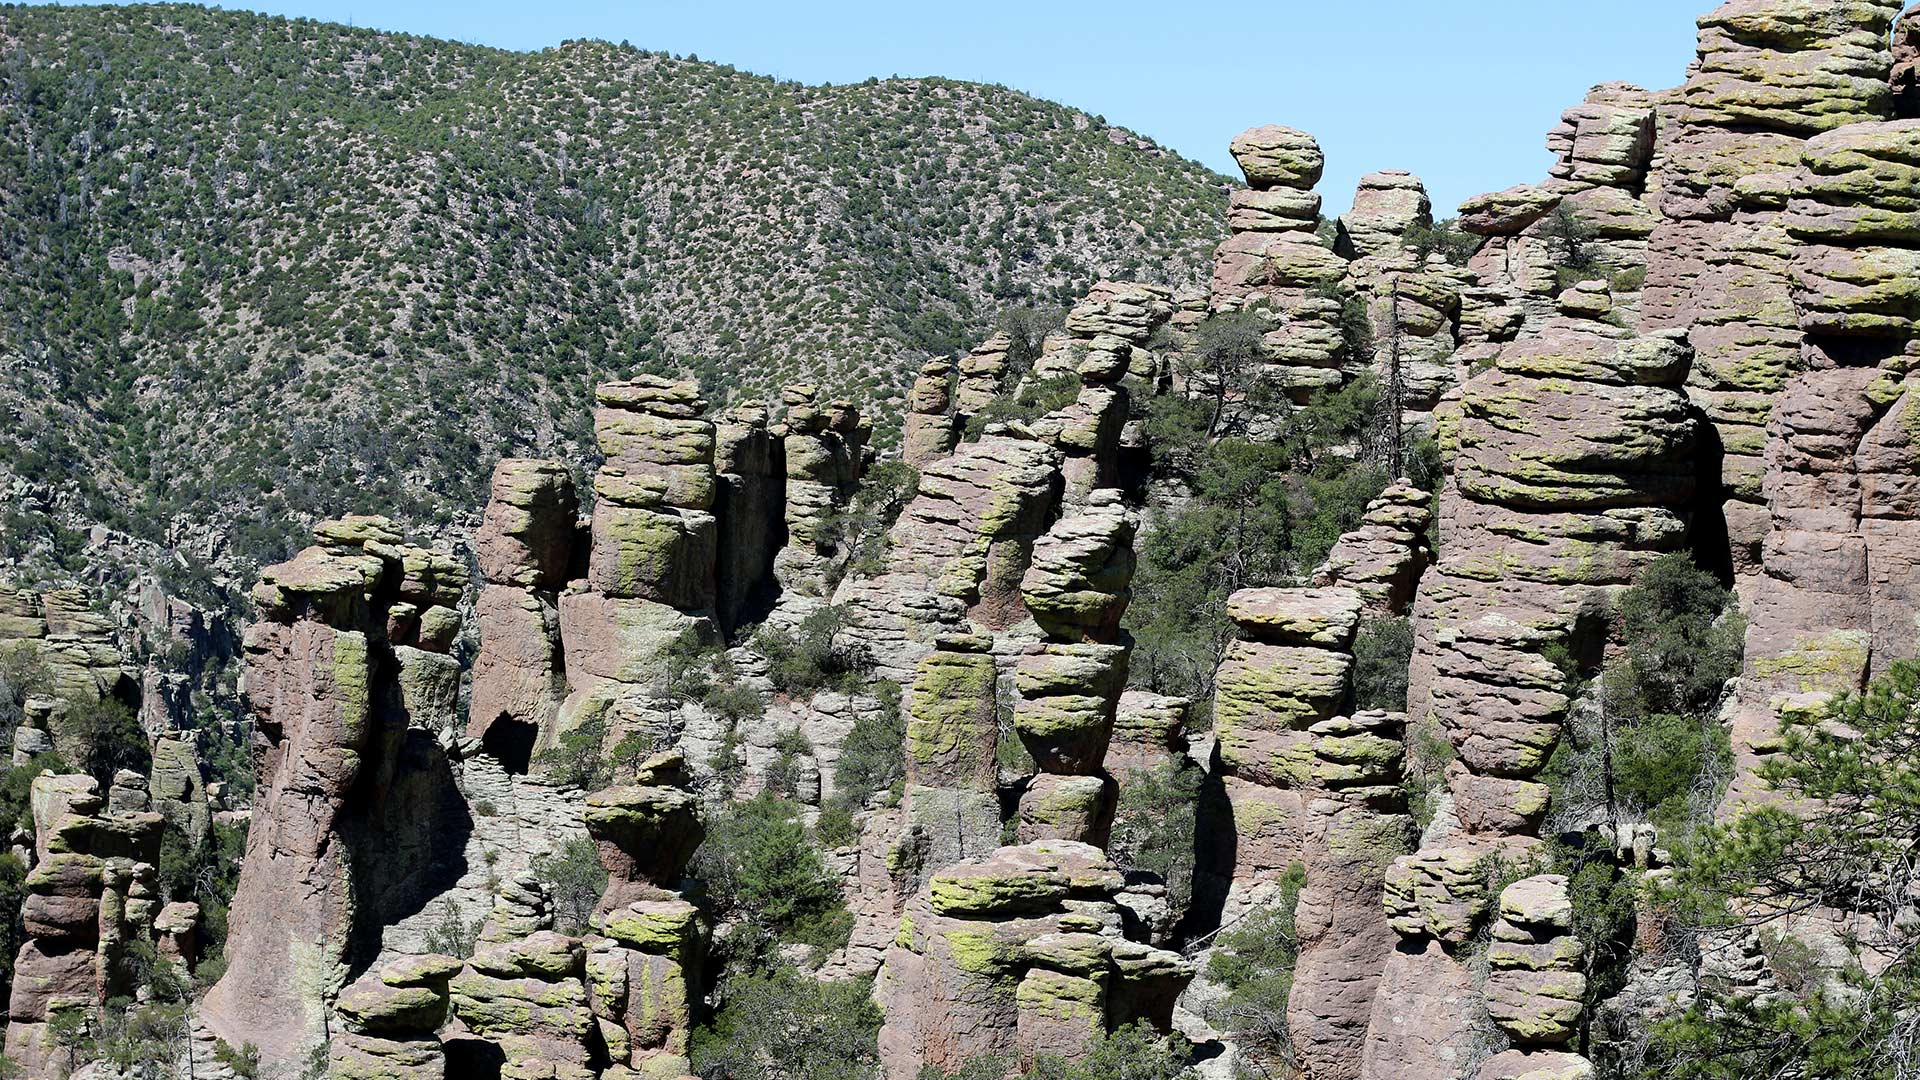 Established in 1924, the Chiricahua National Monument is up for redesignation to national park status. The monument could become Arizona's fourth national park. 